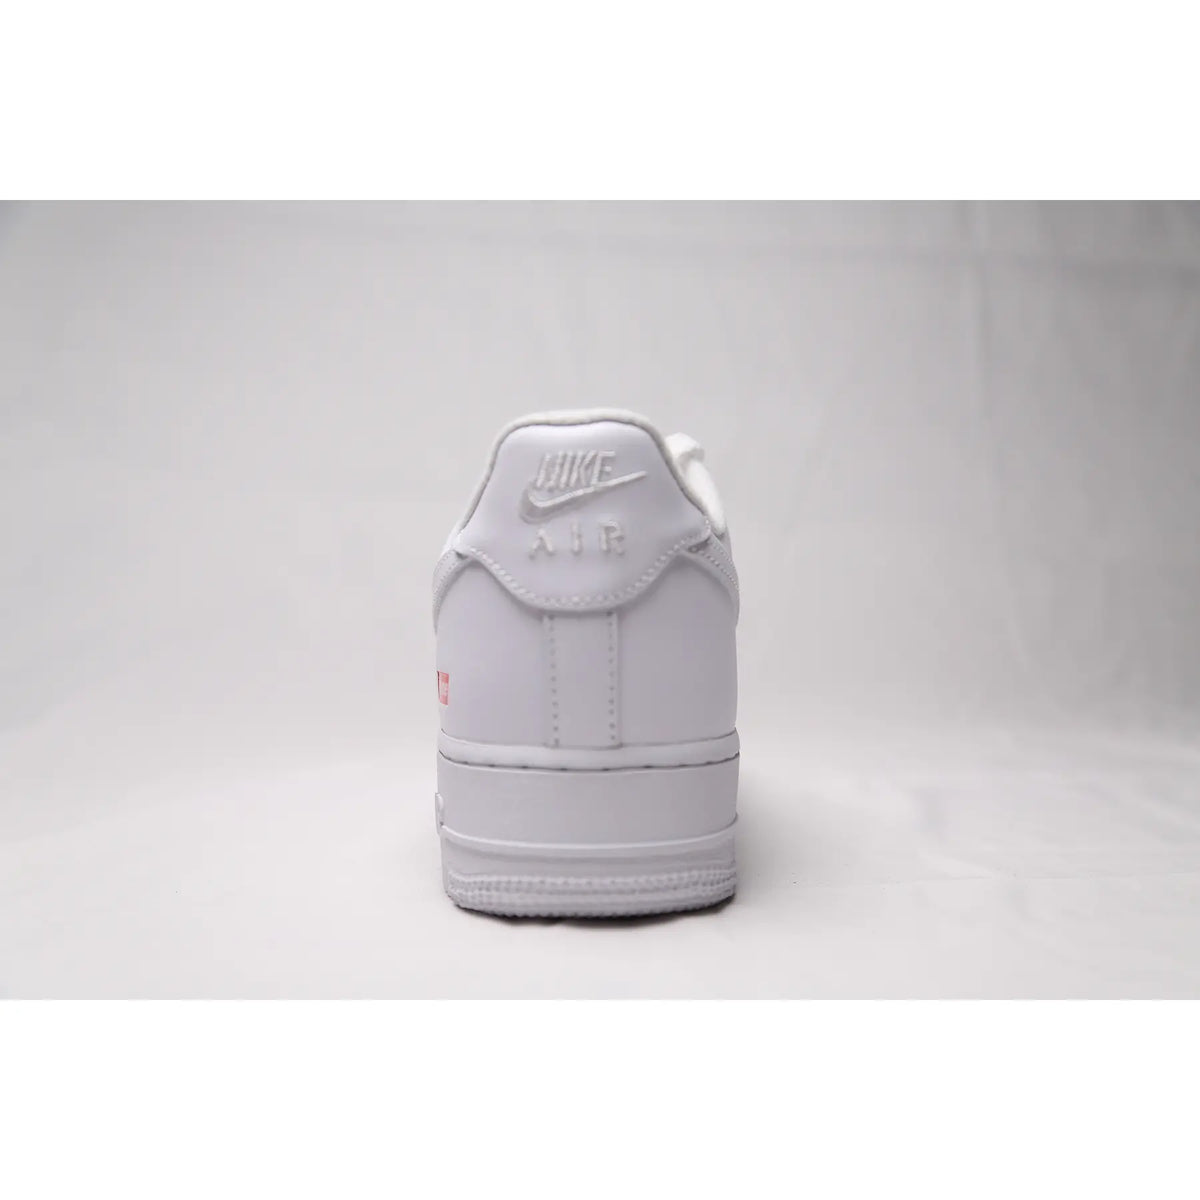 Nike Air Force 1 Low Supreme White – 3SSENCE